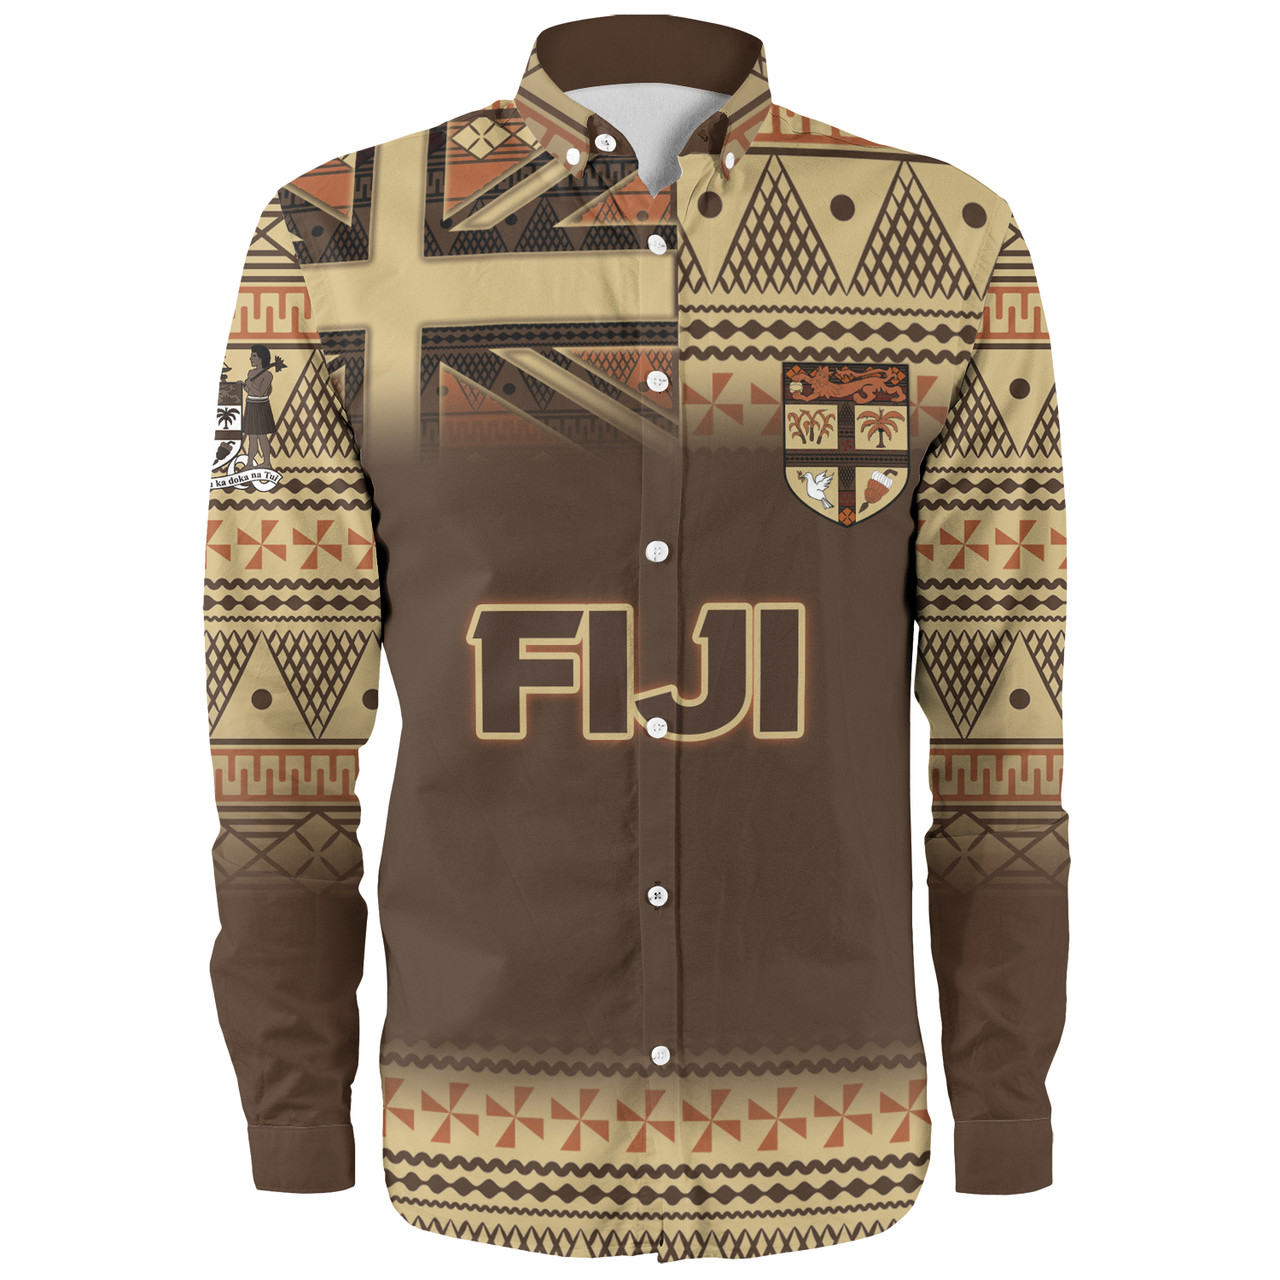 Fiji Long Sleeve Shirt Flag Color With Traditional Patterns Ver 2